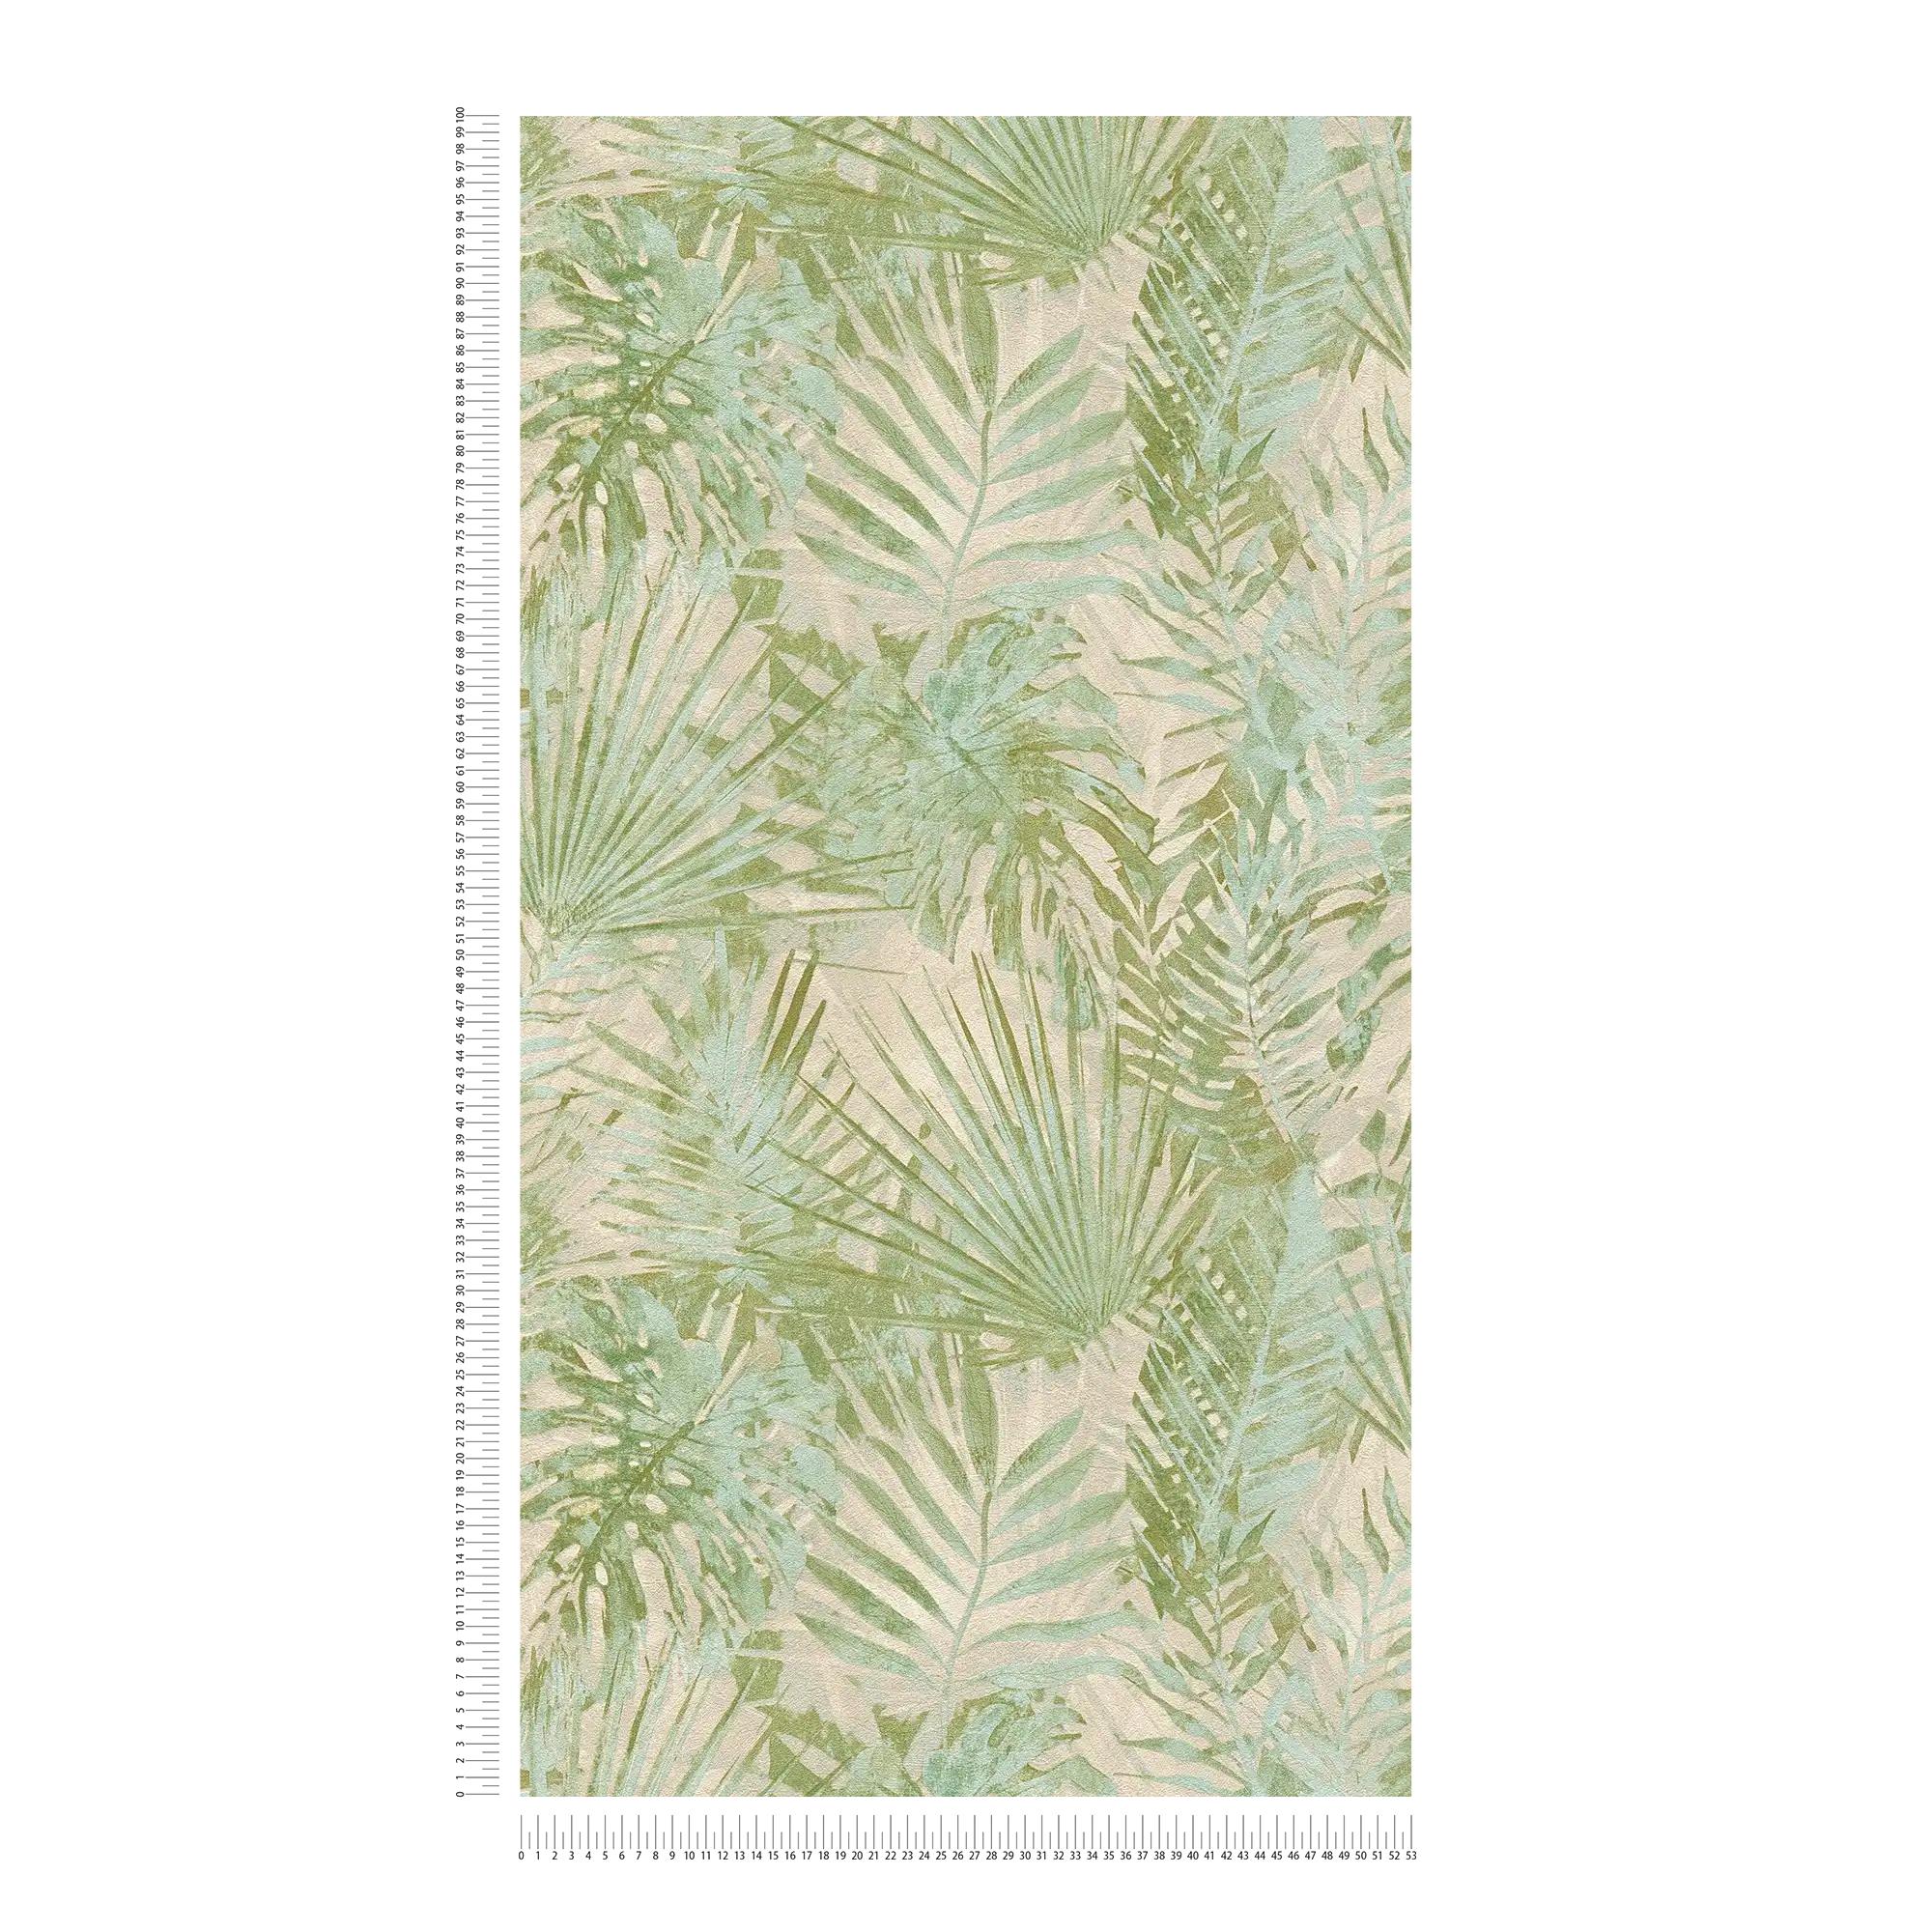             Non-woven wallpaper with jungle leaves PVC-free - green, beige
        